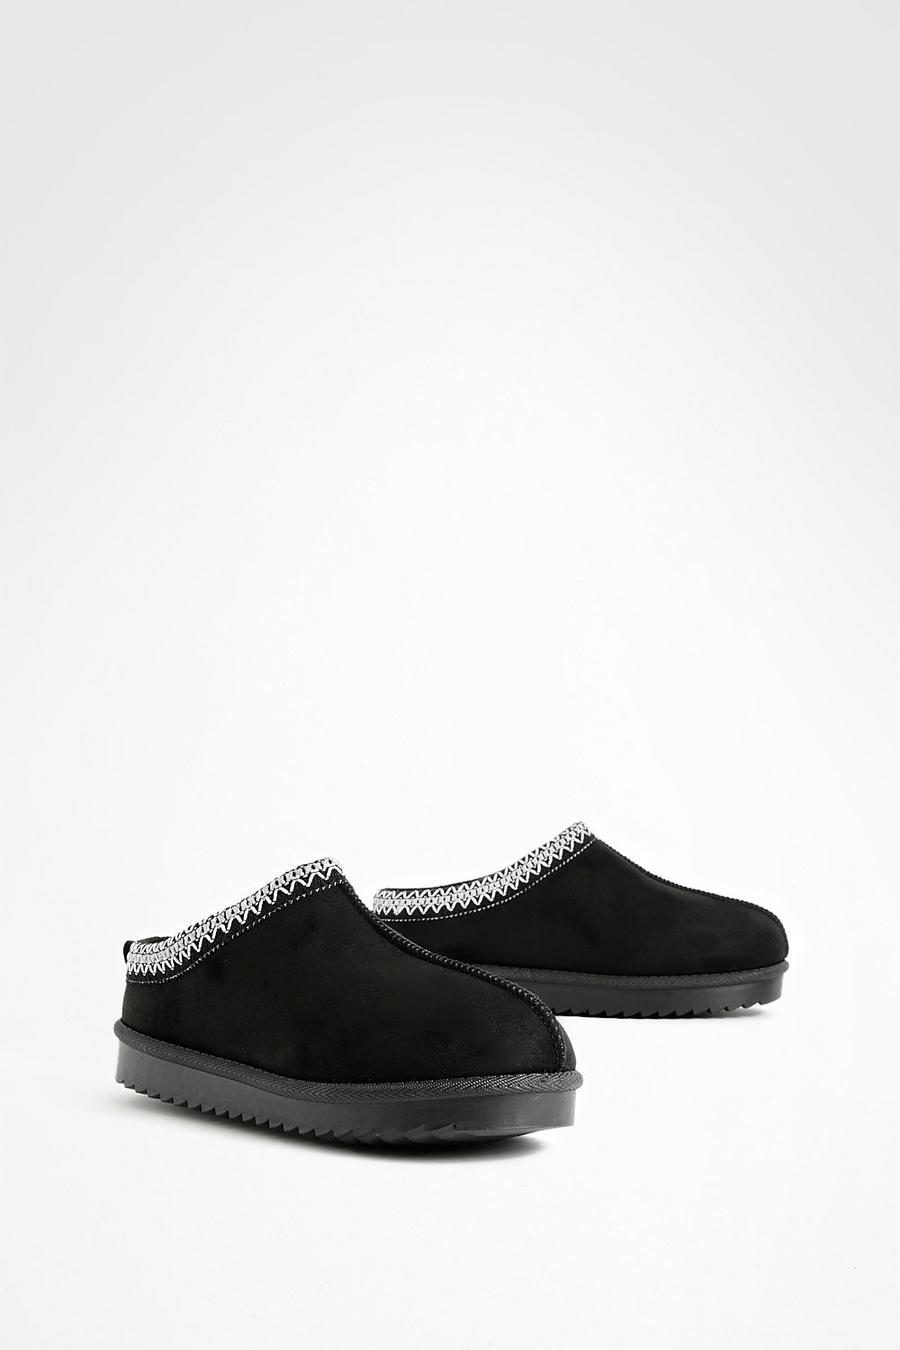 Black Embroidered Slip On Cozy Mules image number 1